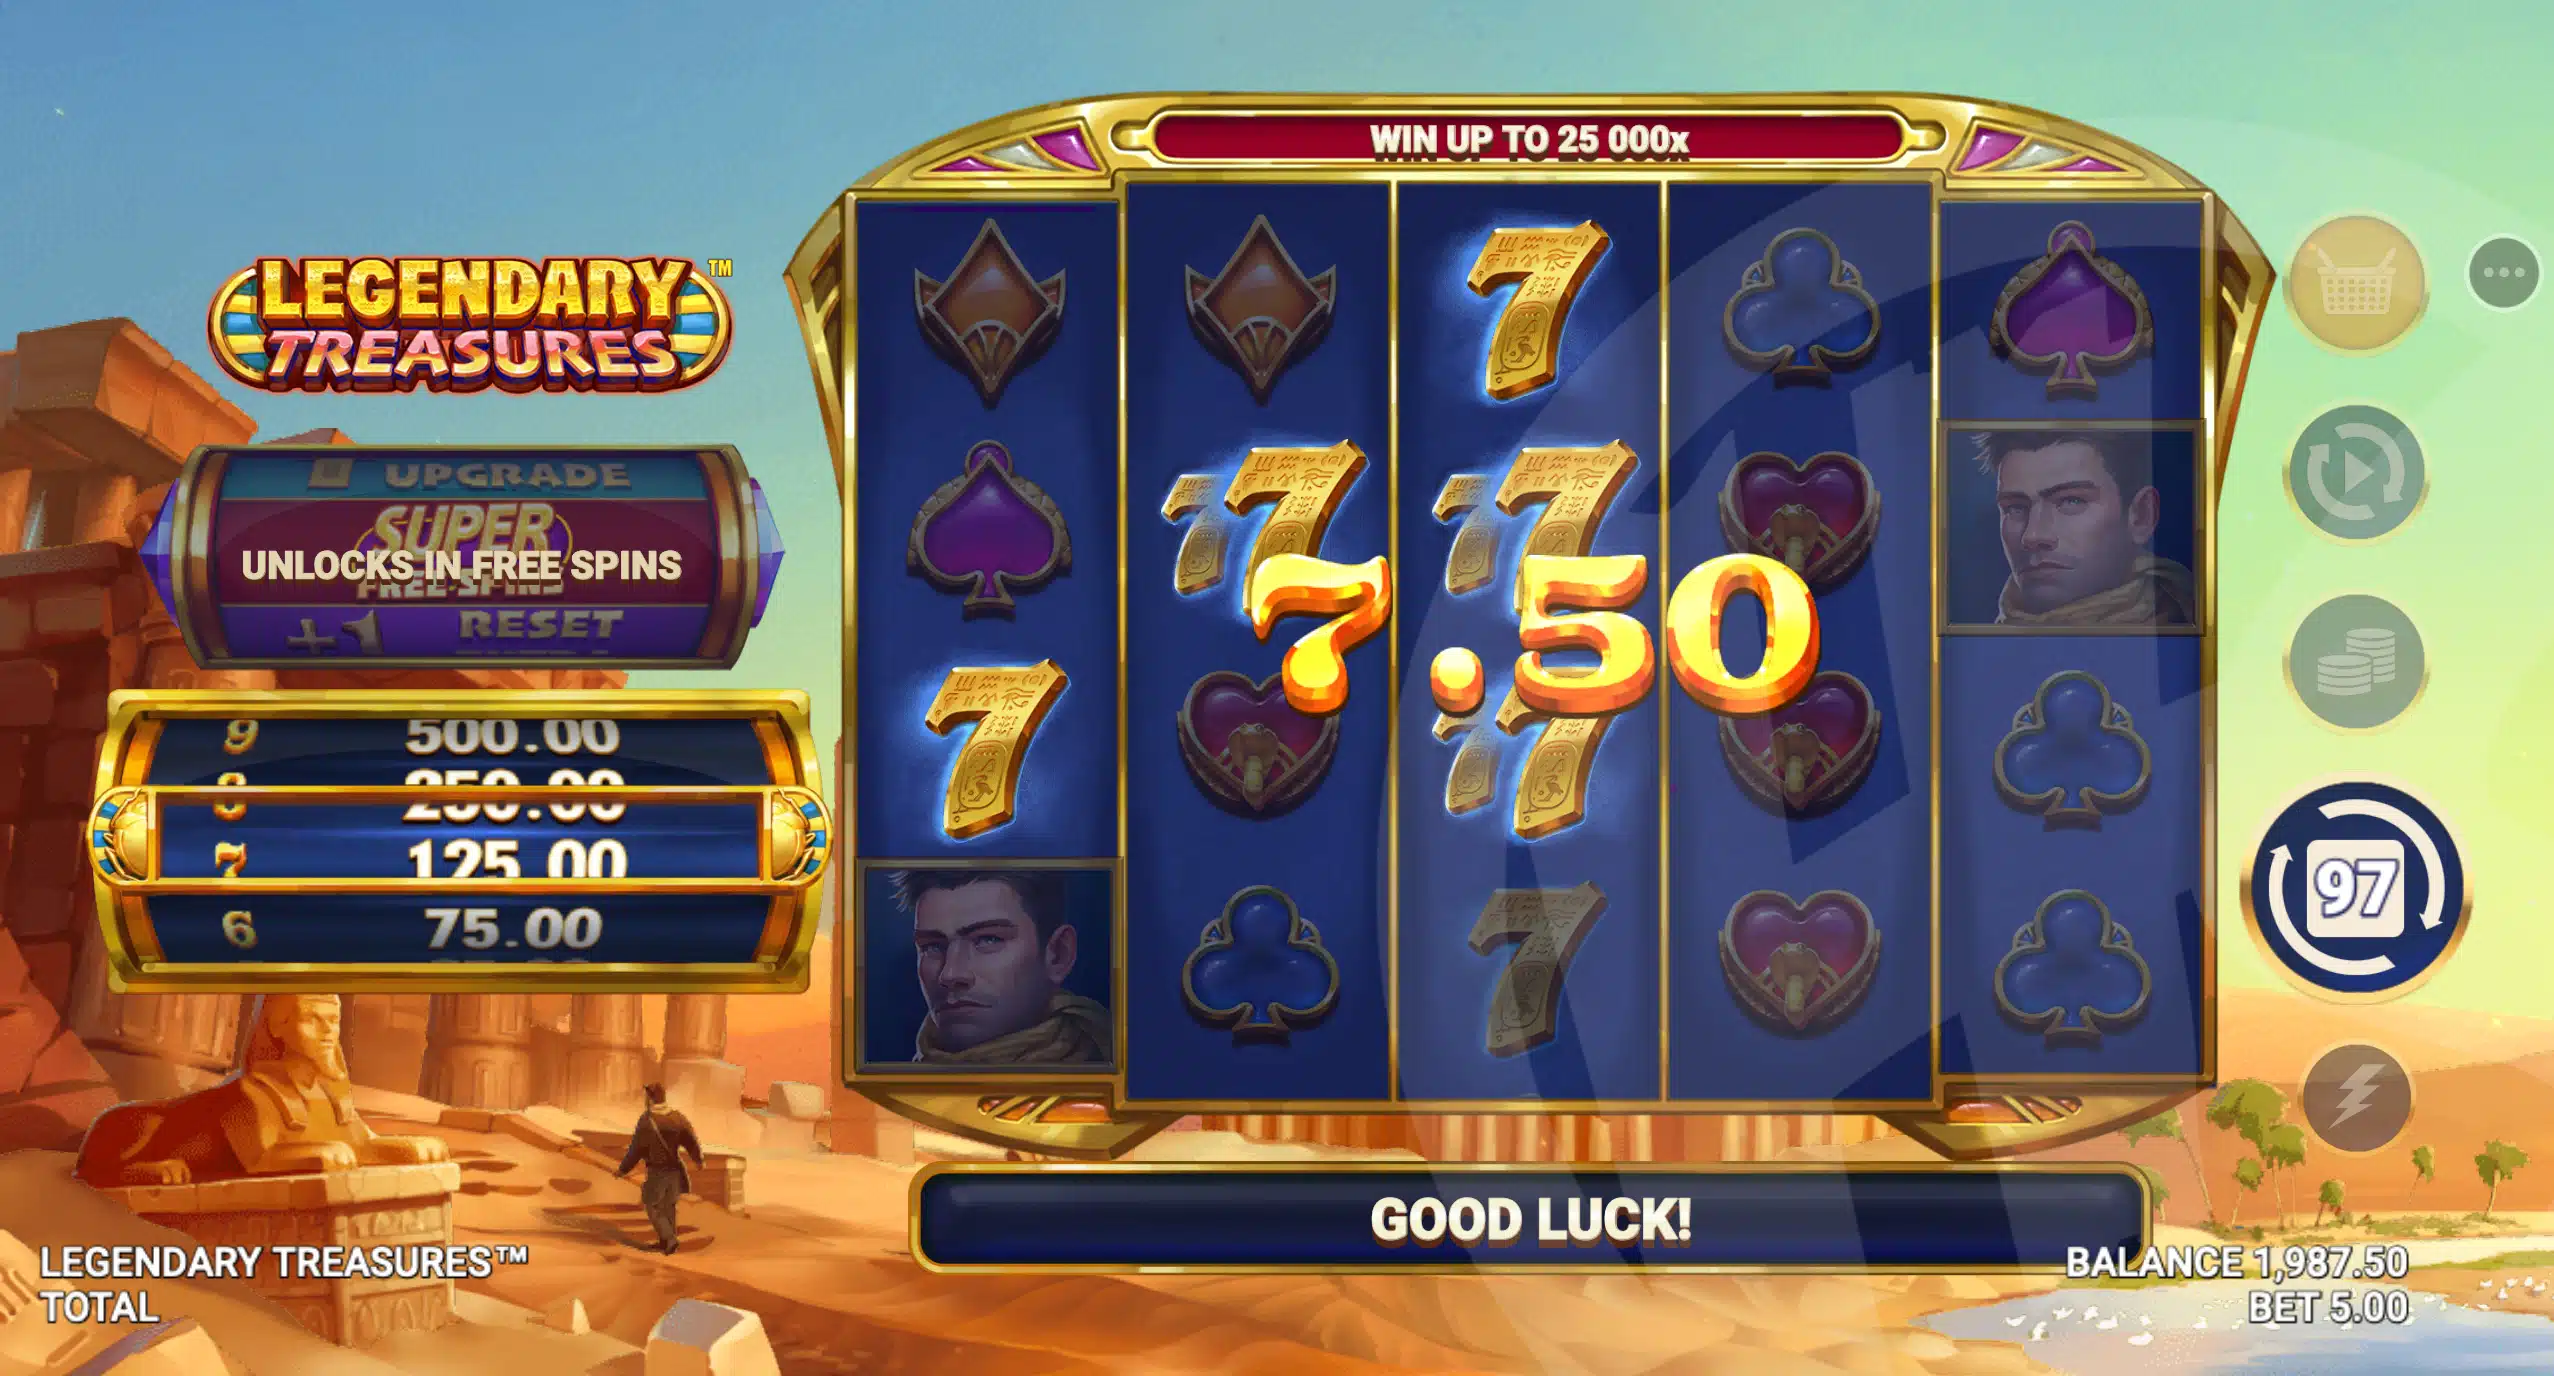 Legendary Treasures Offers Players 40 Fixed Win Lines